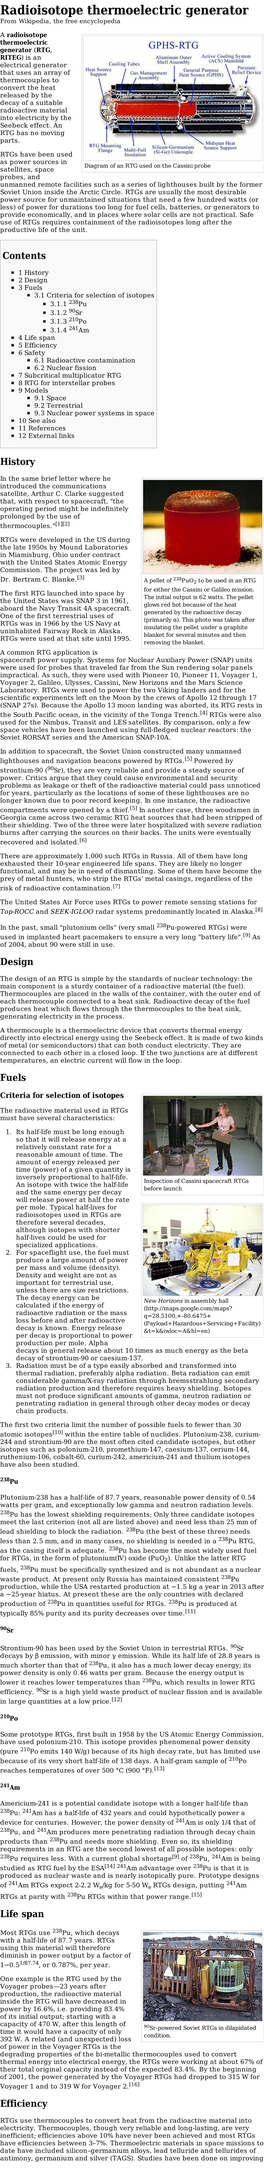 Radioisotope Thermoelectric Generator from Wikipedia, the Free Encyclopedia